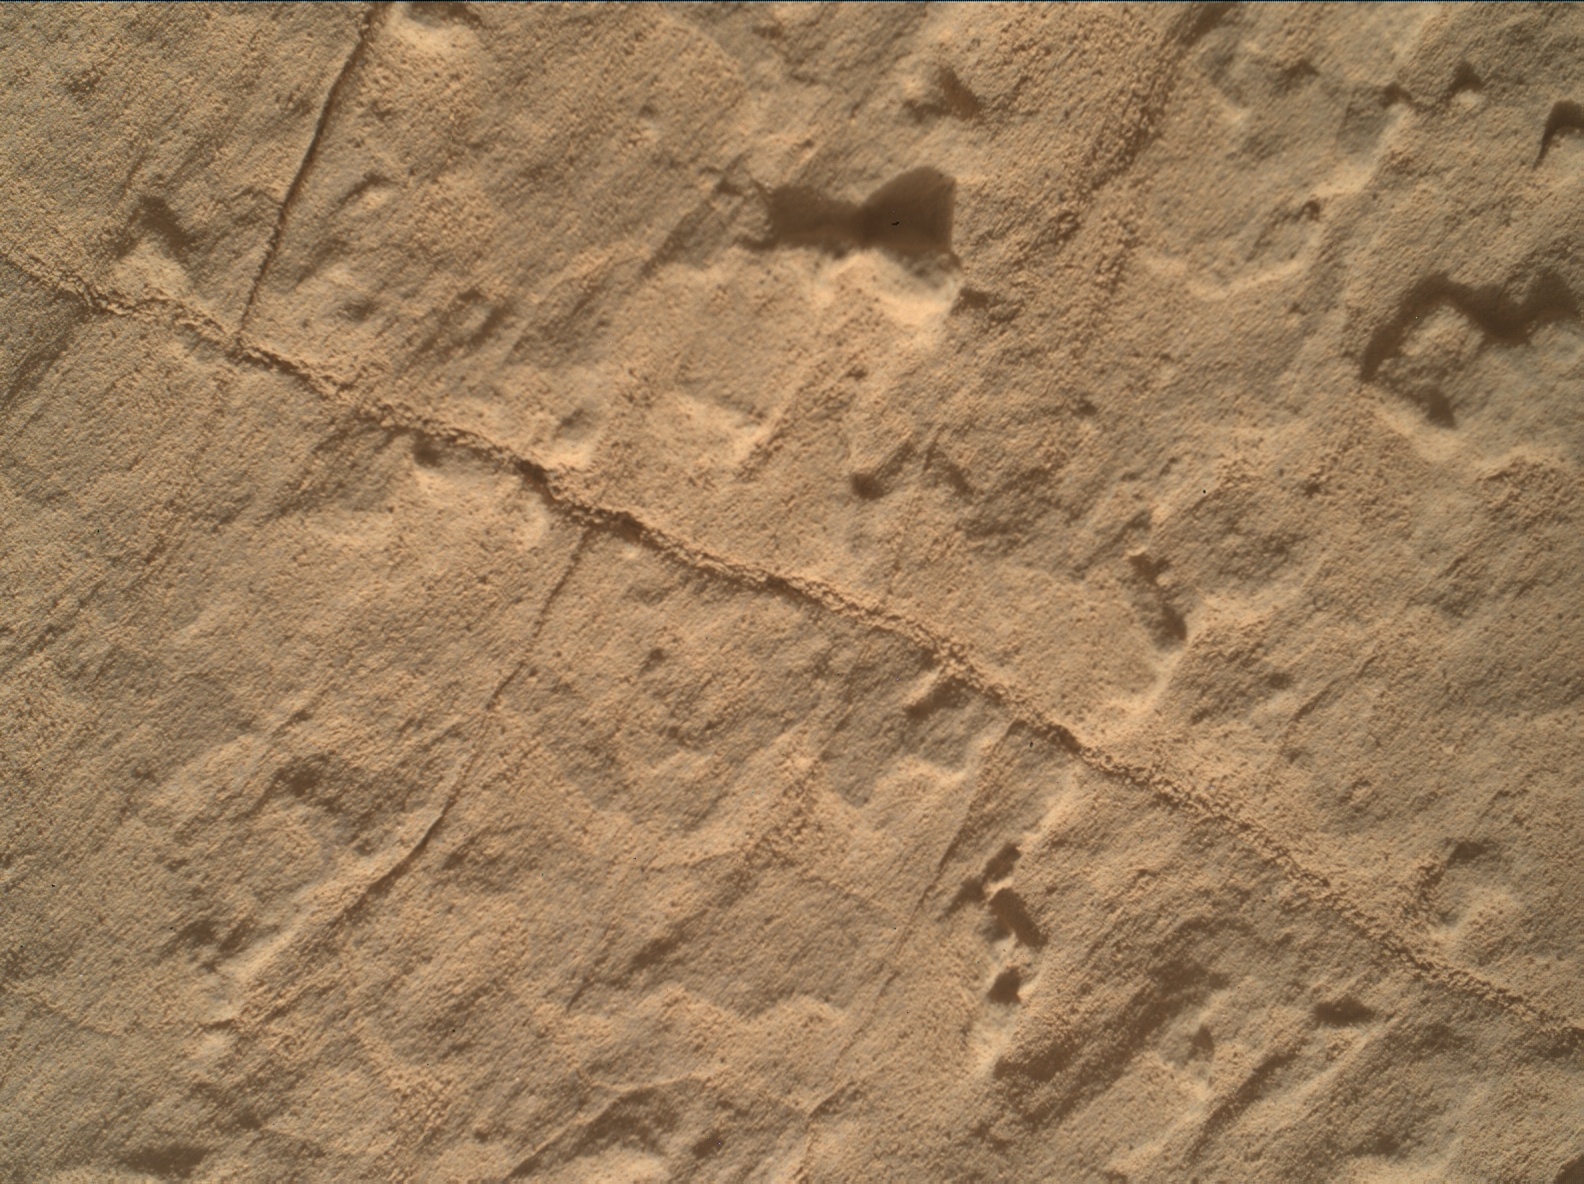 Nasa's Mars rover Curiosity acquired this image using its Mars Hand Lens Imager (MAHLI) on Sol 3895